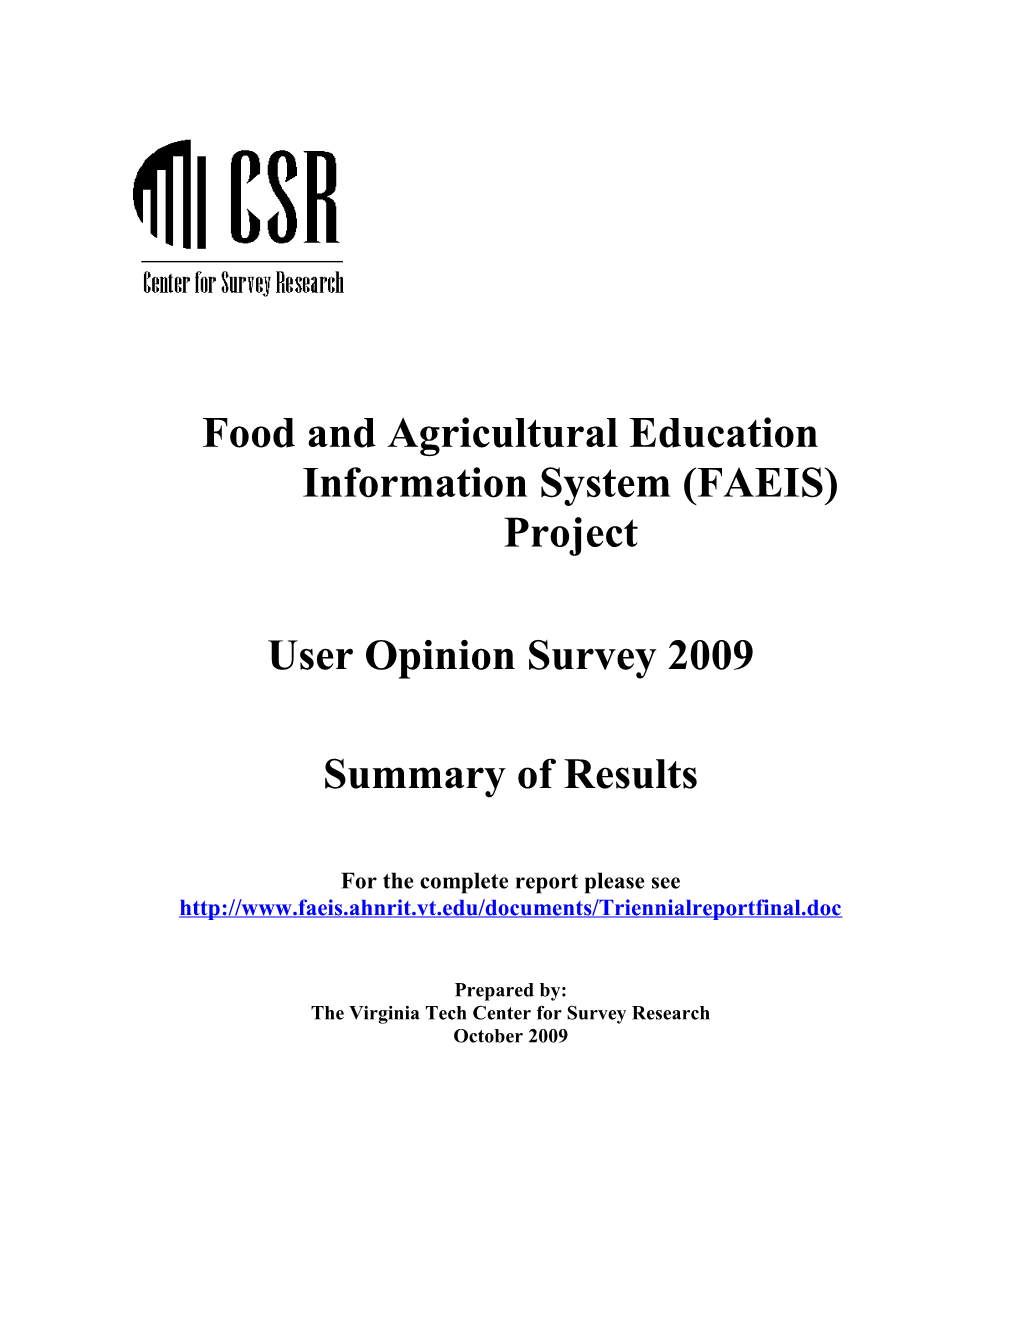 Food and Agricultural Education Information System (FAEIS) Project